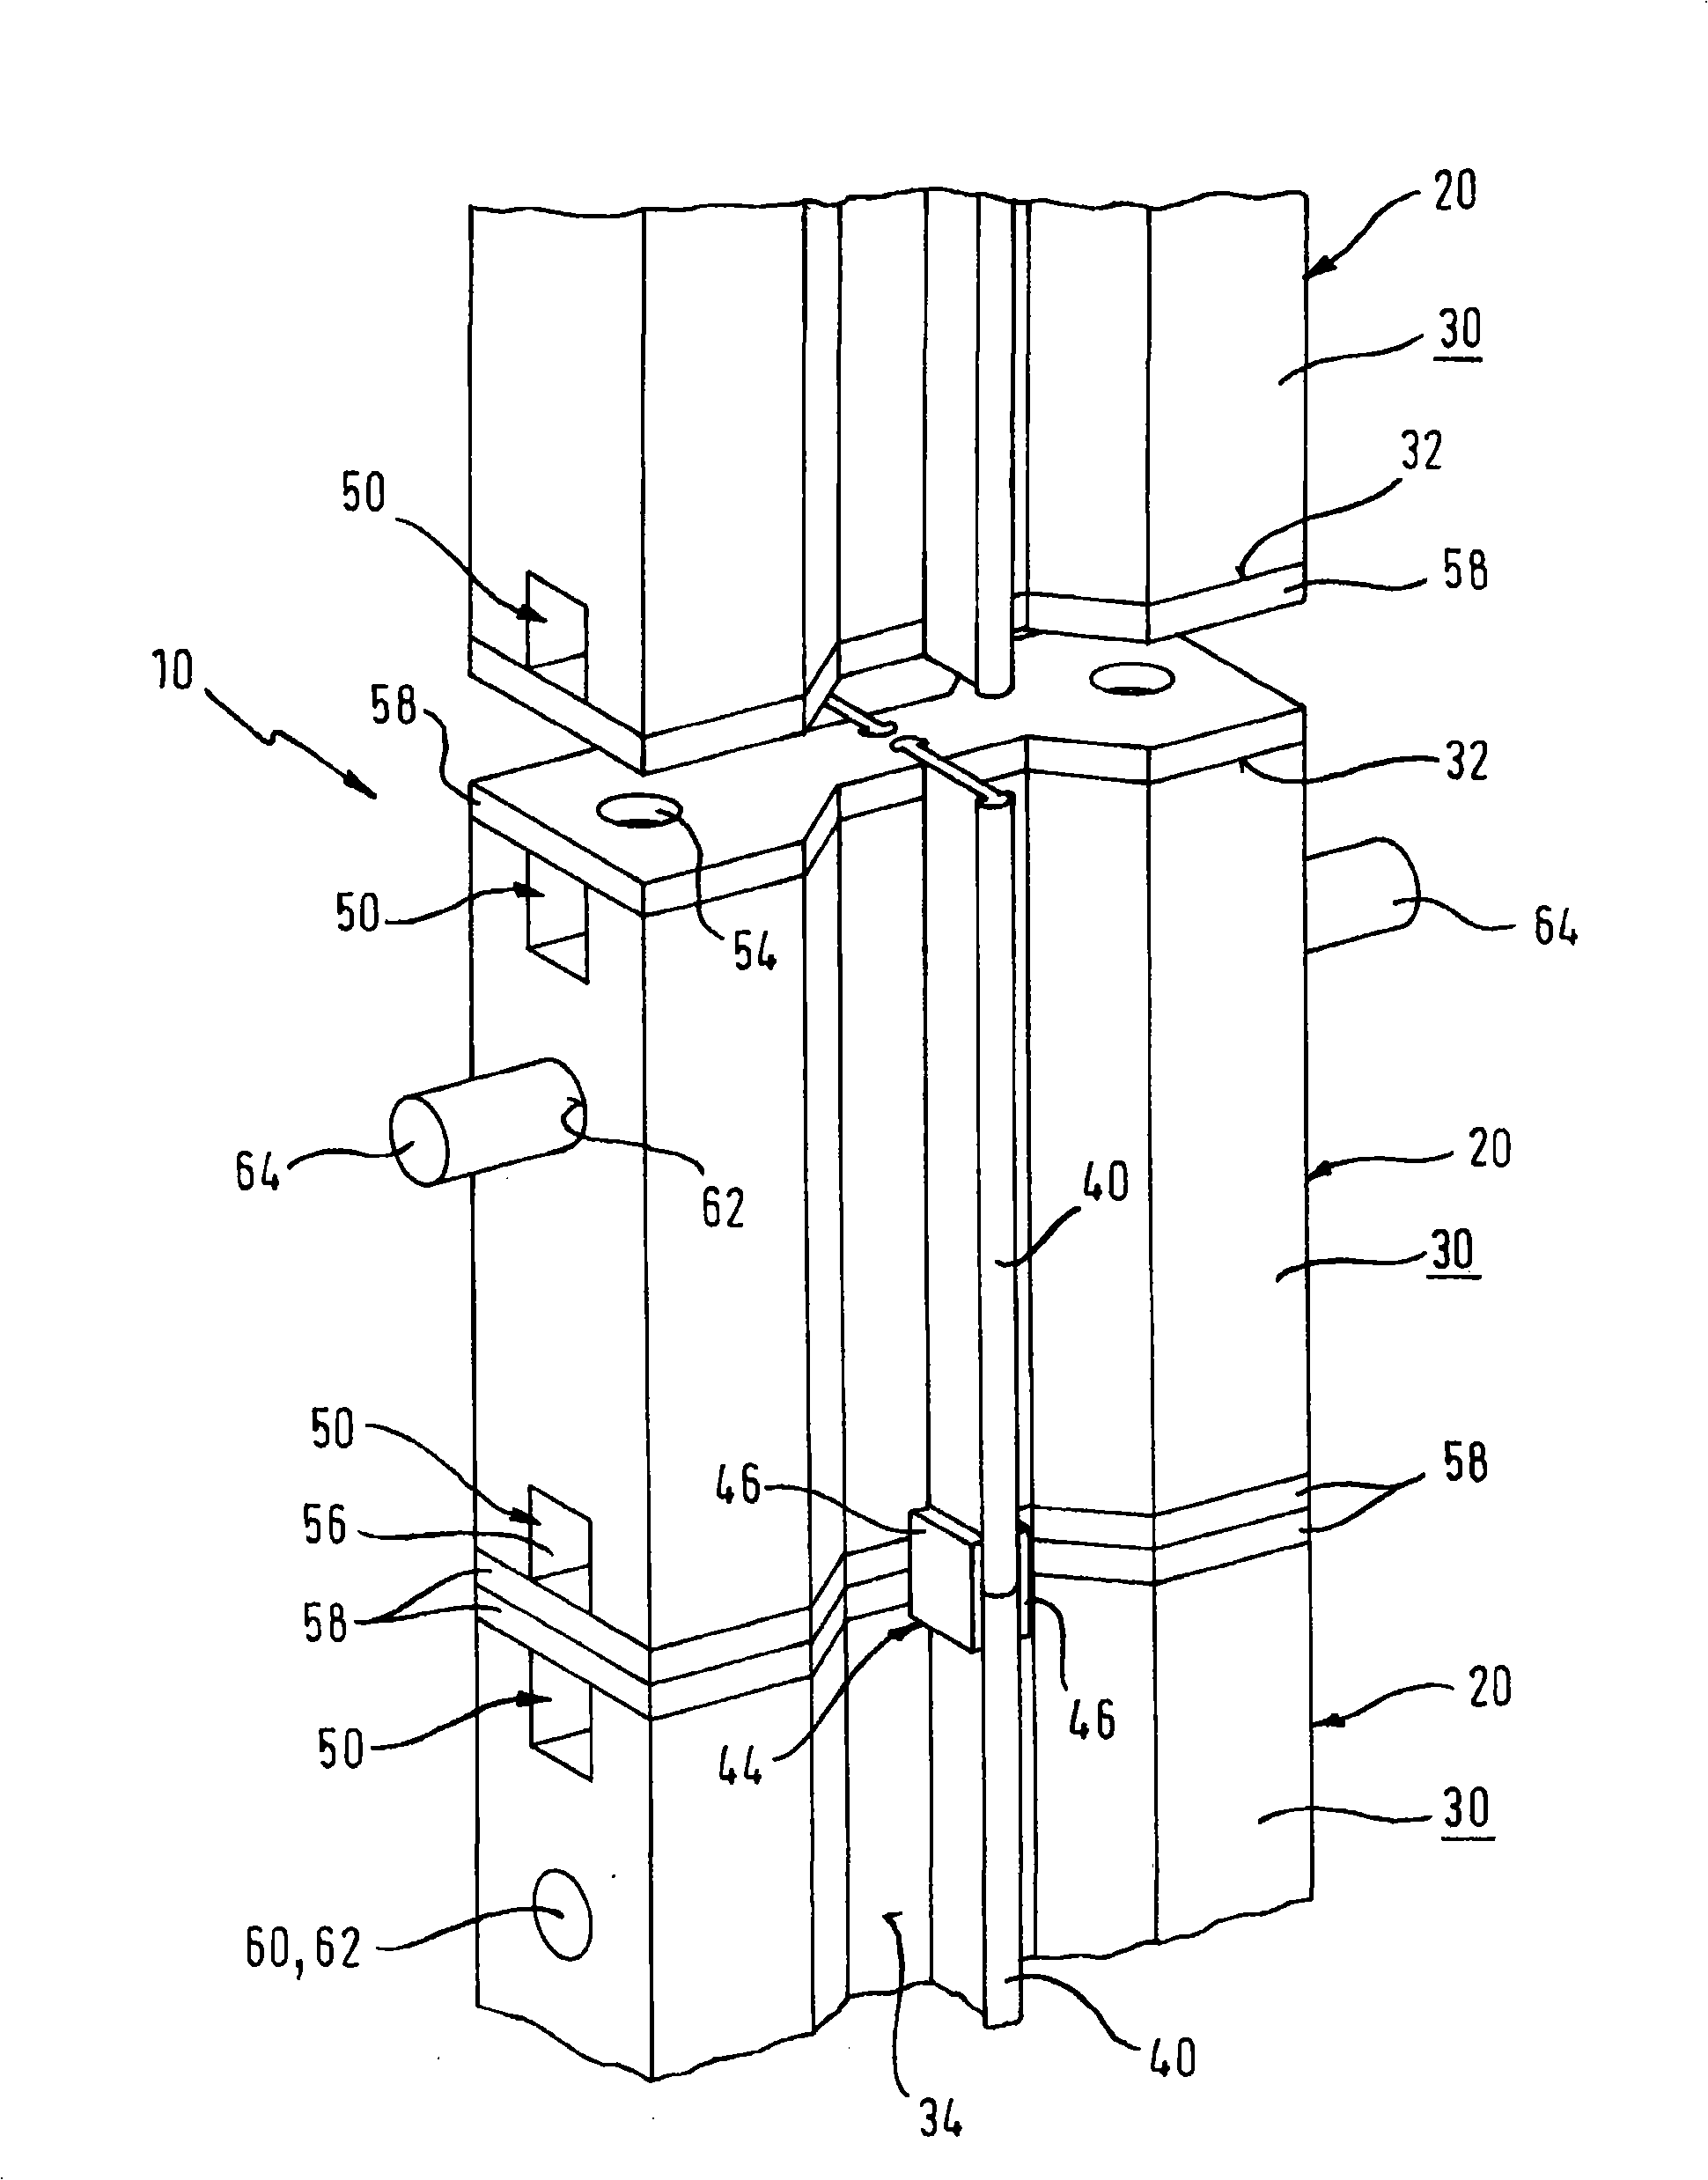 Formwork for limiting a diaphragm wall section, formwork element and method for manufacturing a diaphragm wall in the ground